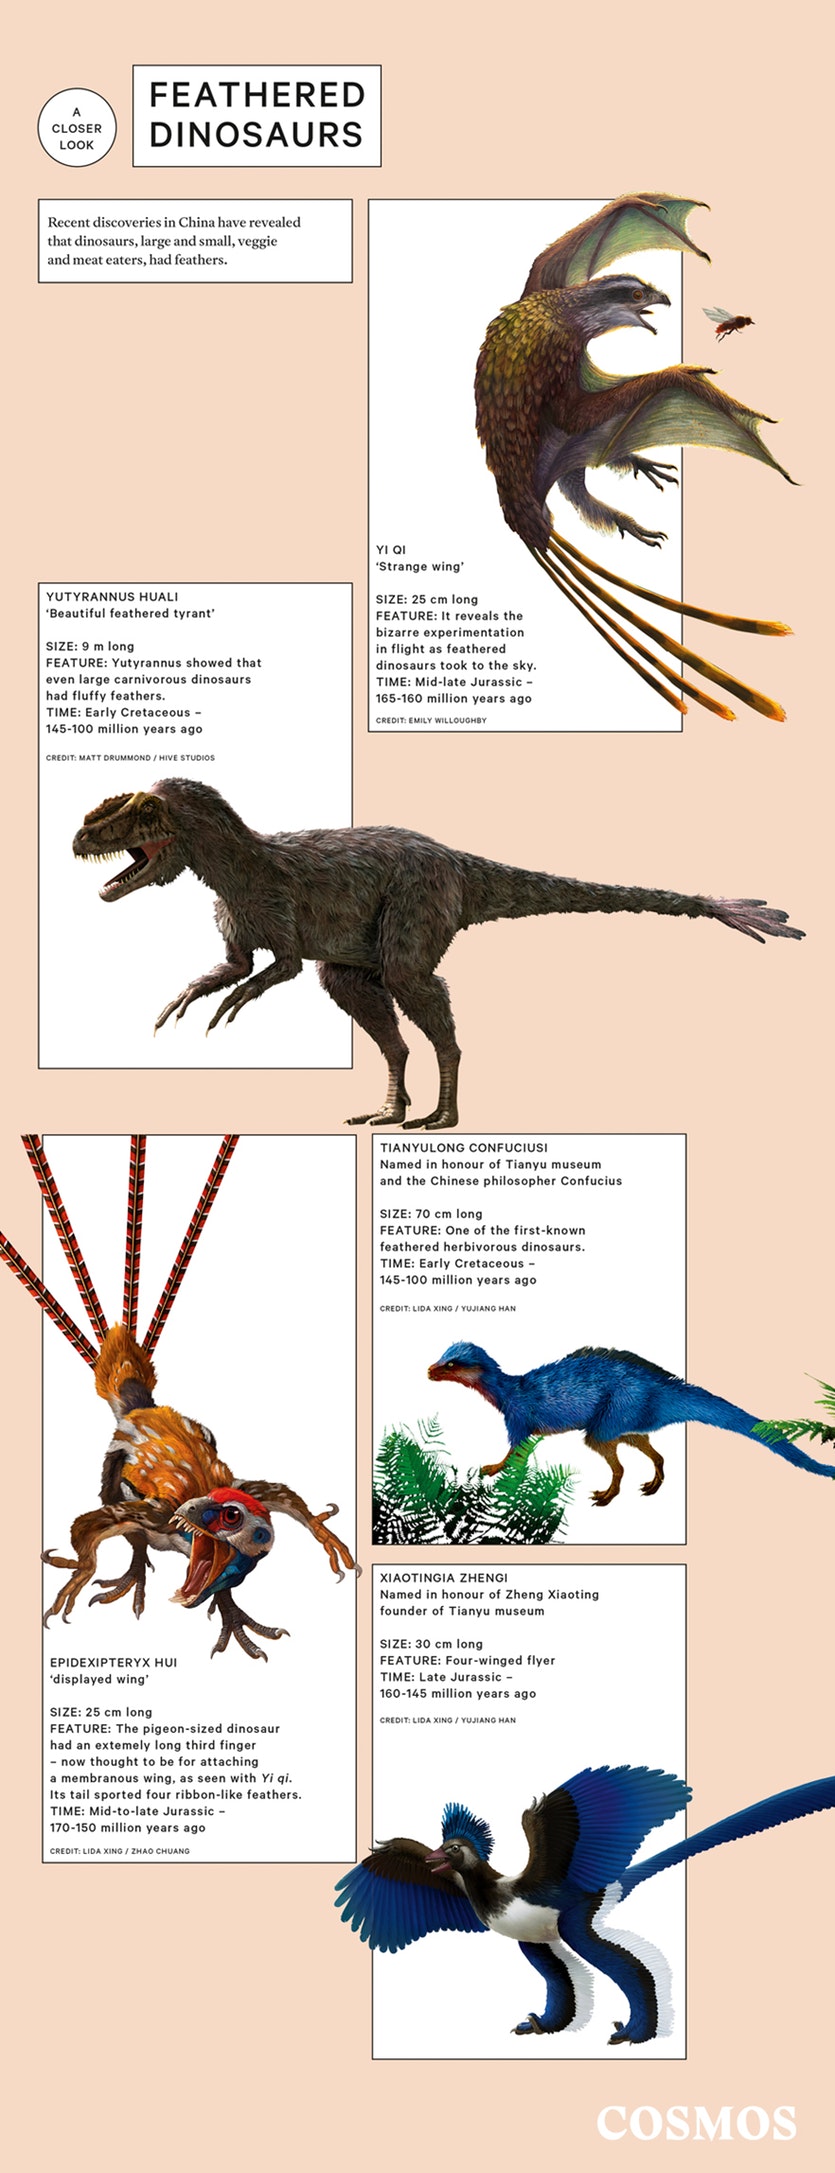 FEATHERED DINOSAURS